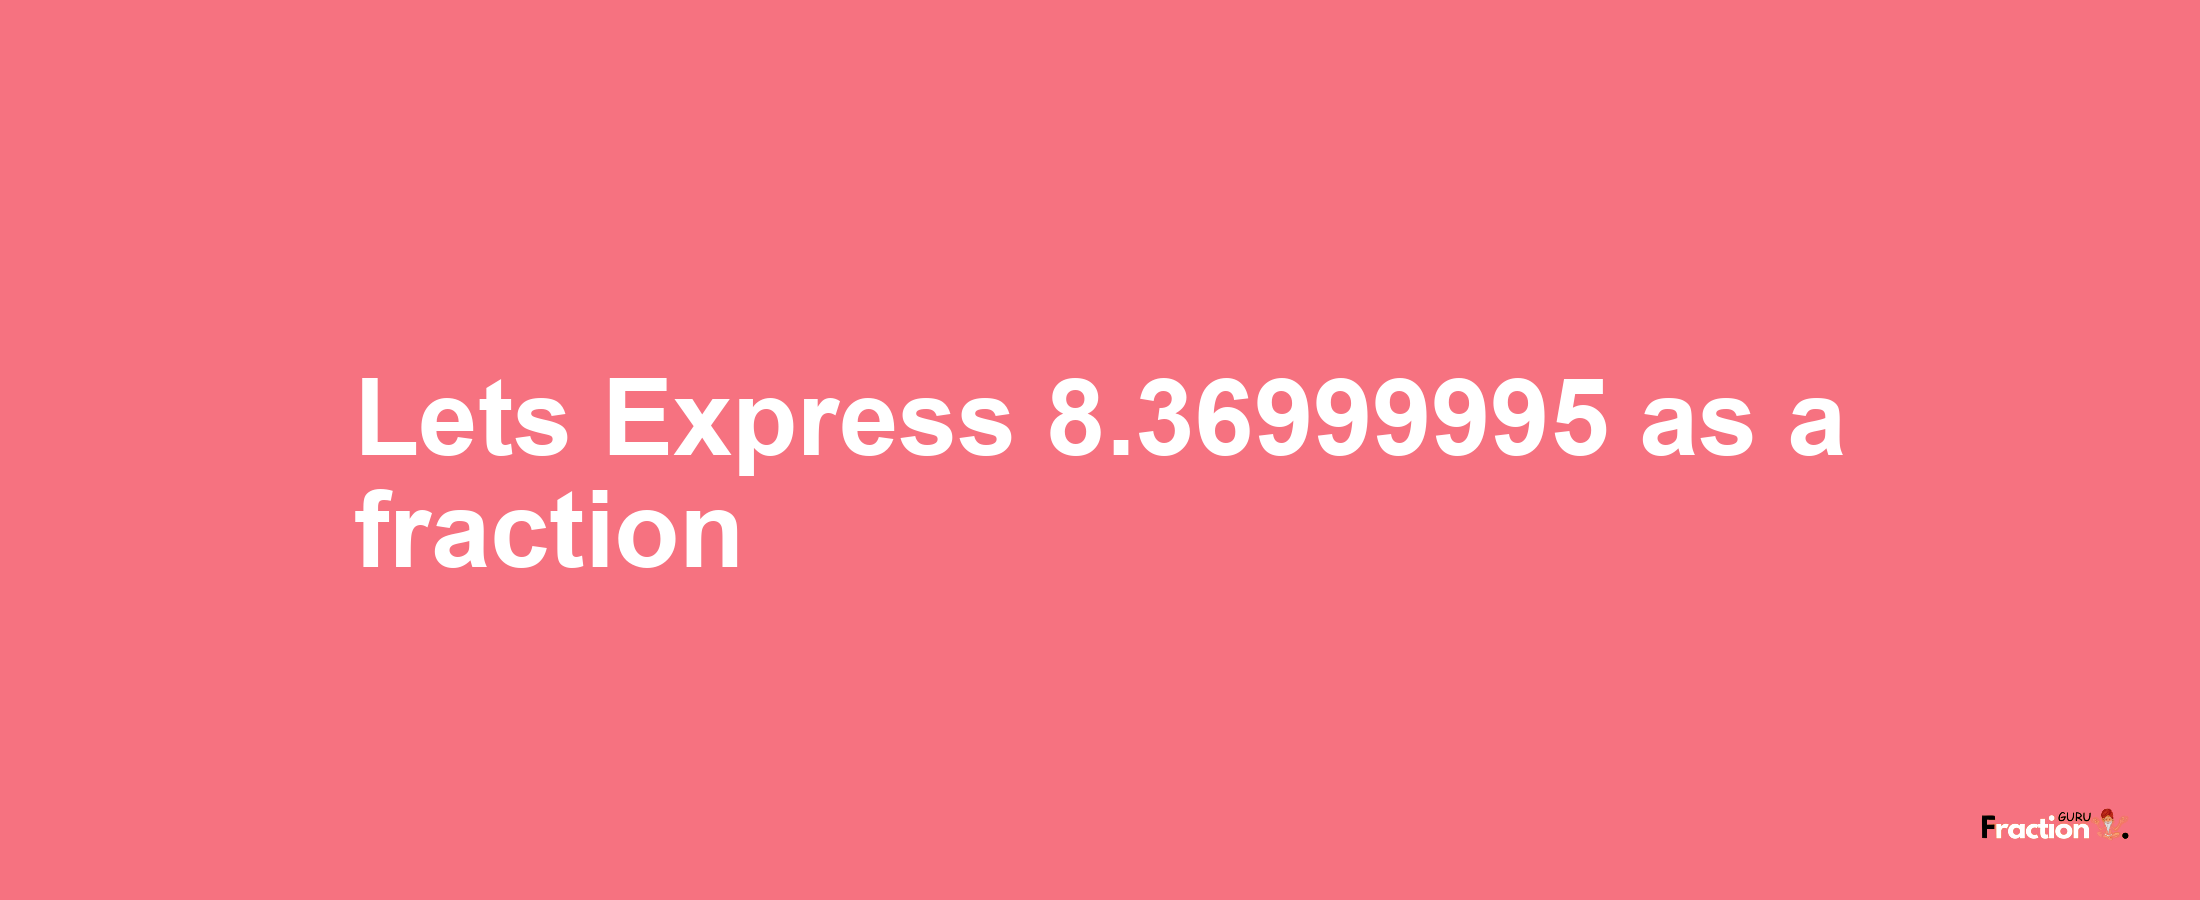 Lets Express 8.36999995 as afraction